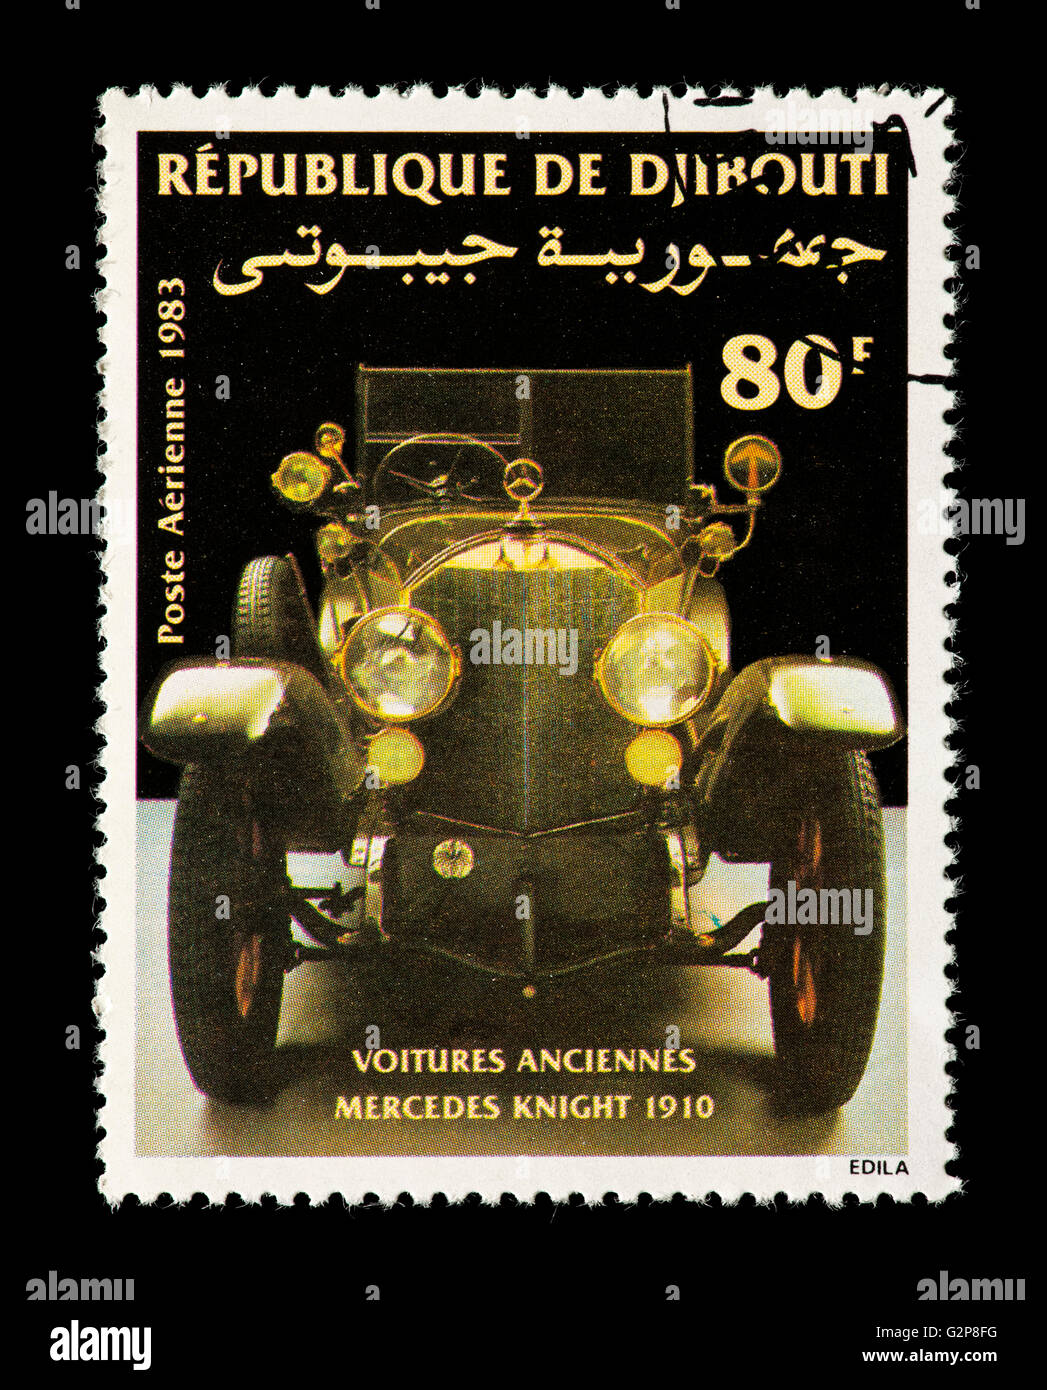 Postage stamp from Djibouti depicting the front end of a Mercedes Knight automobile from 1910. Stock Photo